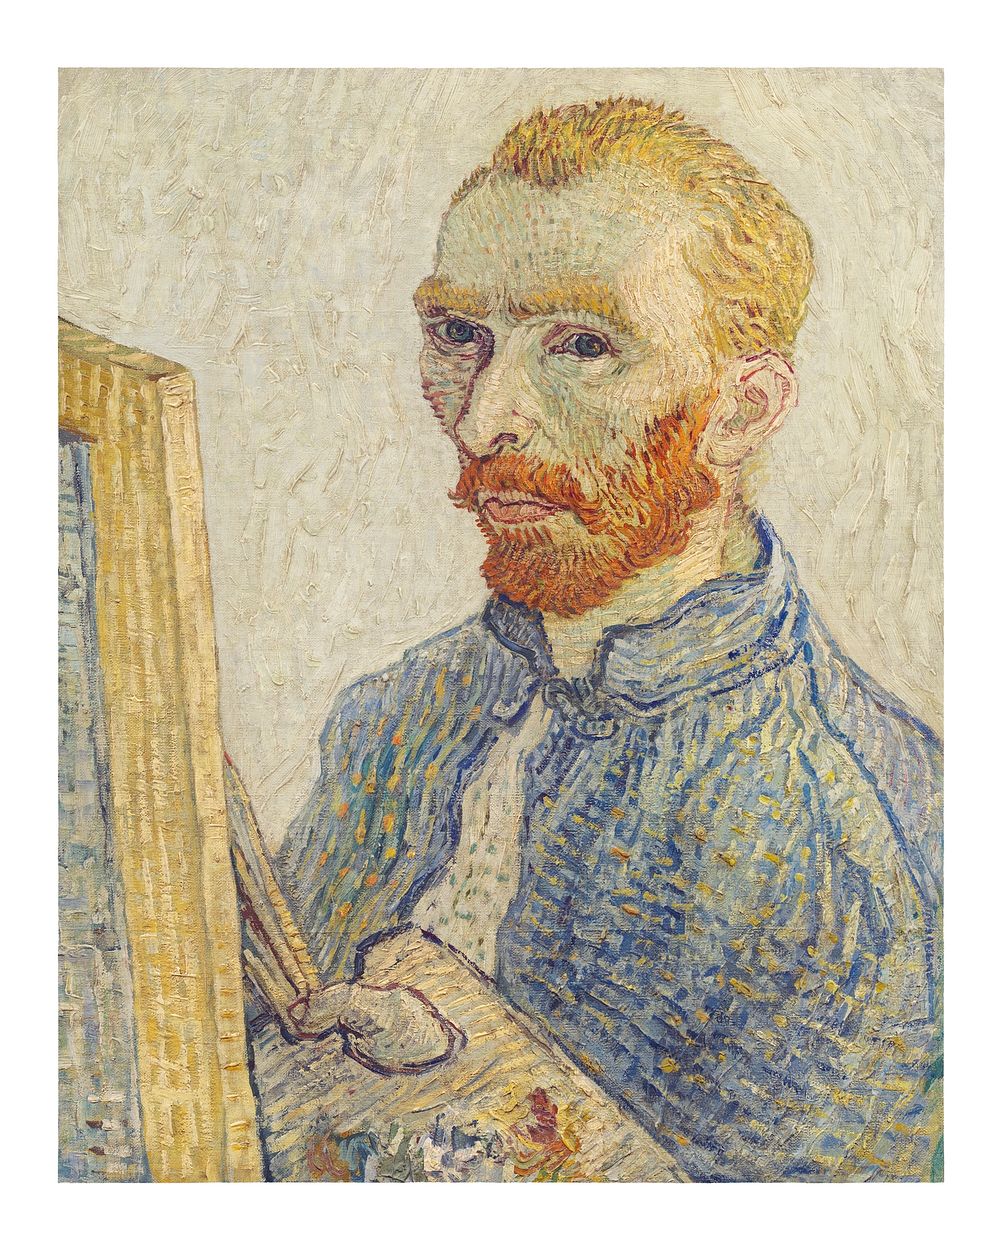 Van Gogh self portrait poster. Painting (1925&ndash;1928 by Vincent van Gogh). Original from The National Gallery of Art.…